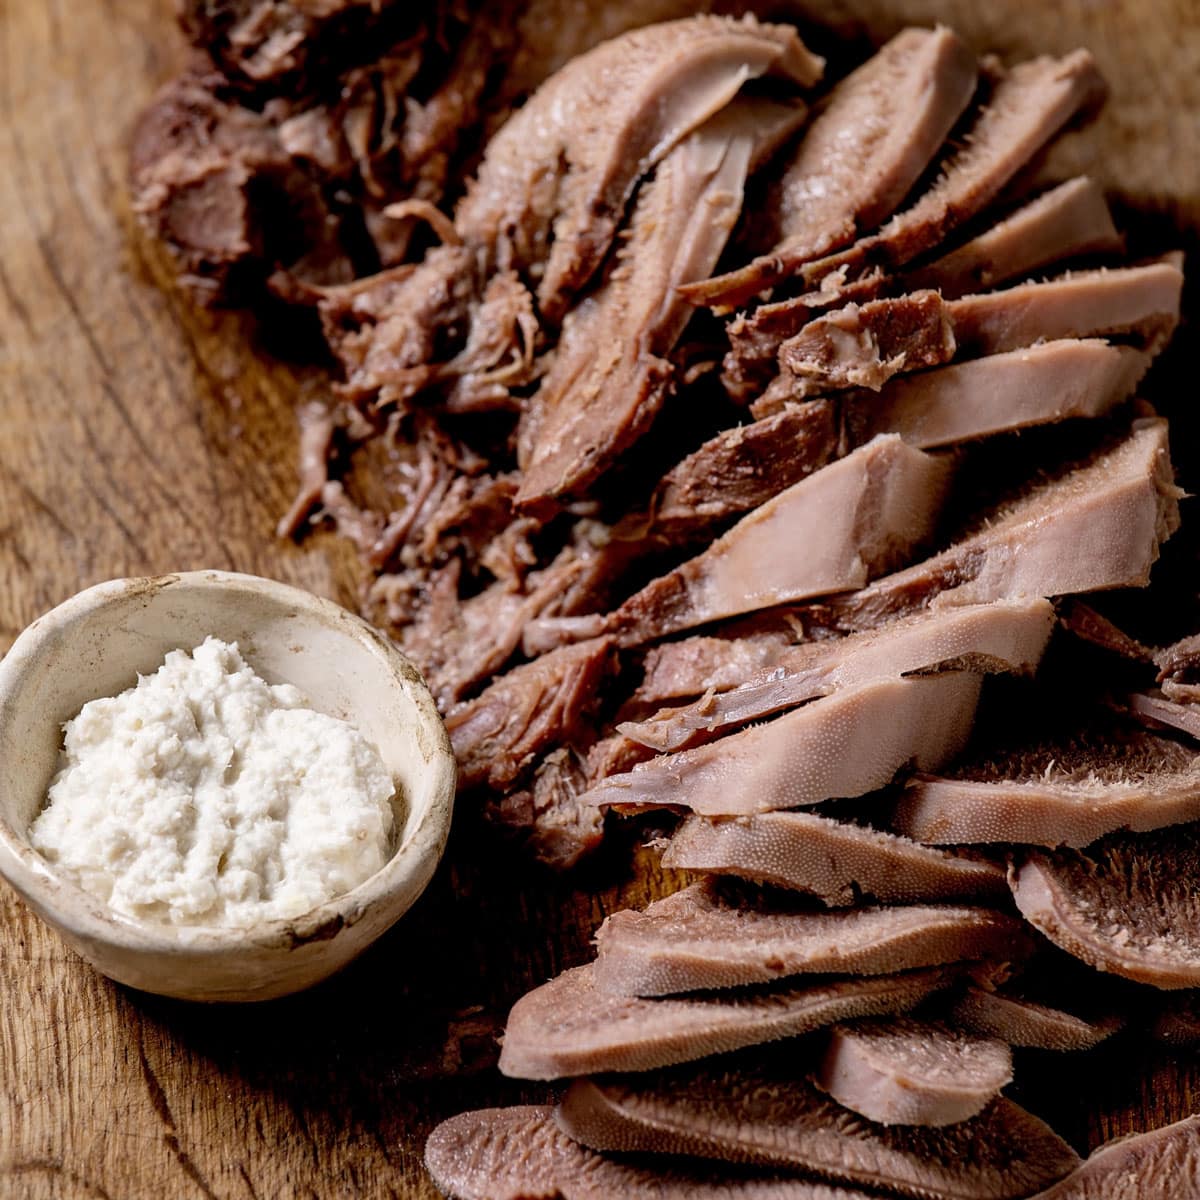 https://commonsensehome.com/wp-content/uploads/2023/10/sliced-cow-tongue-with-horseradish.jpg